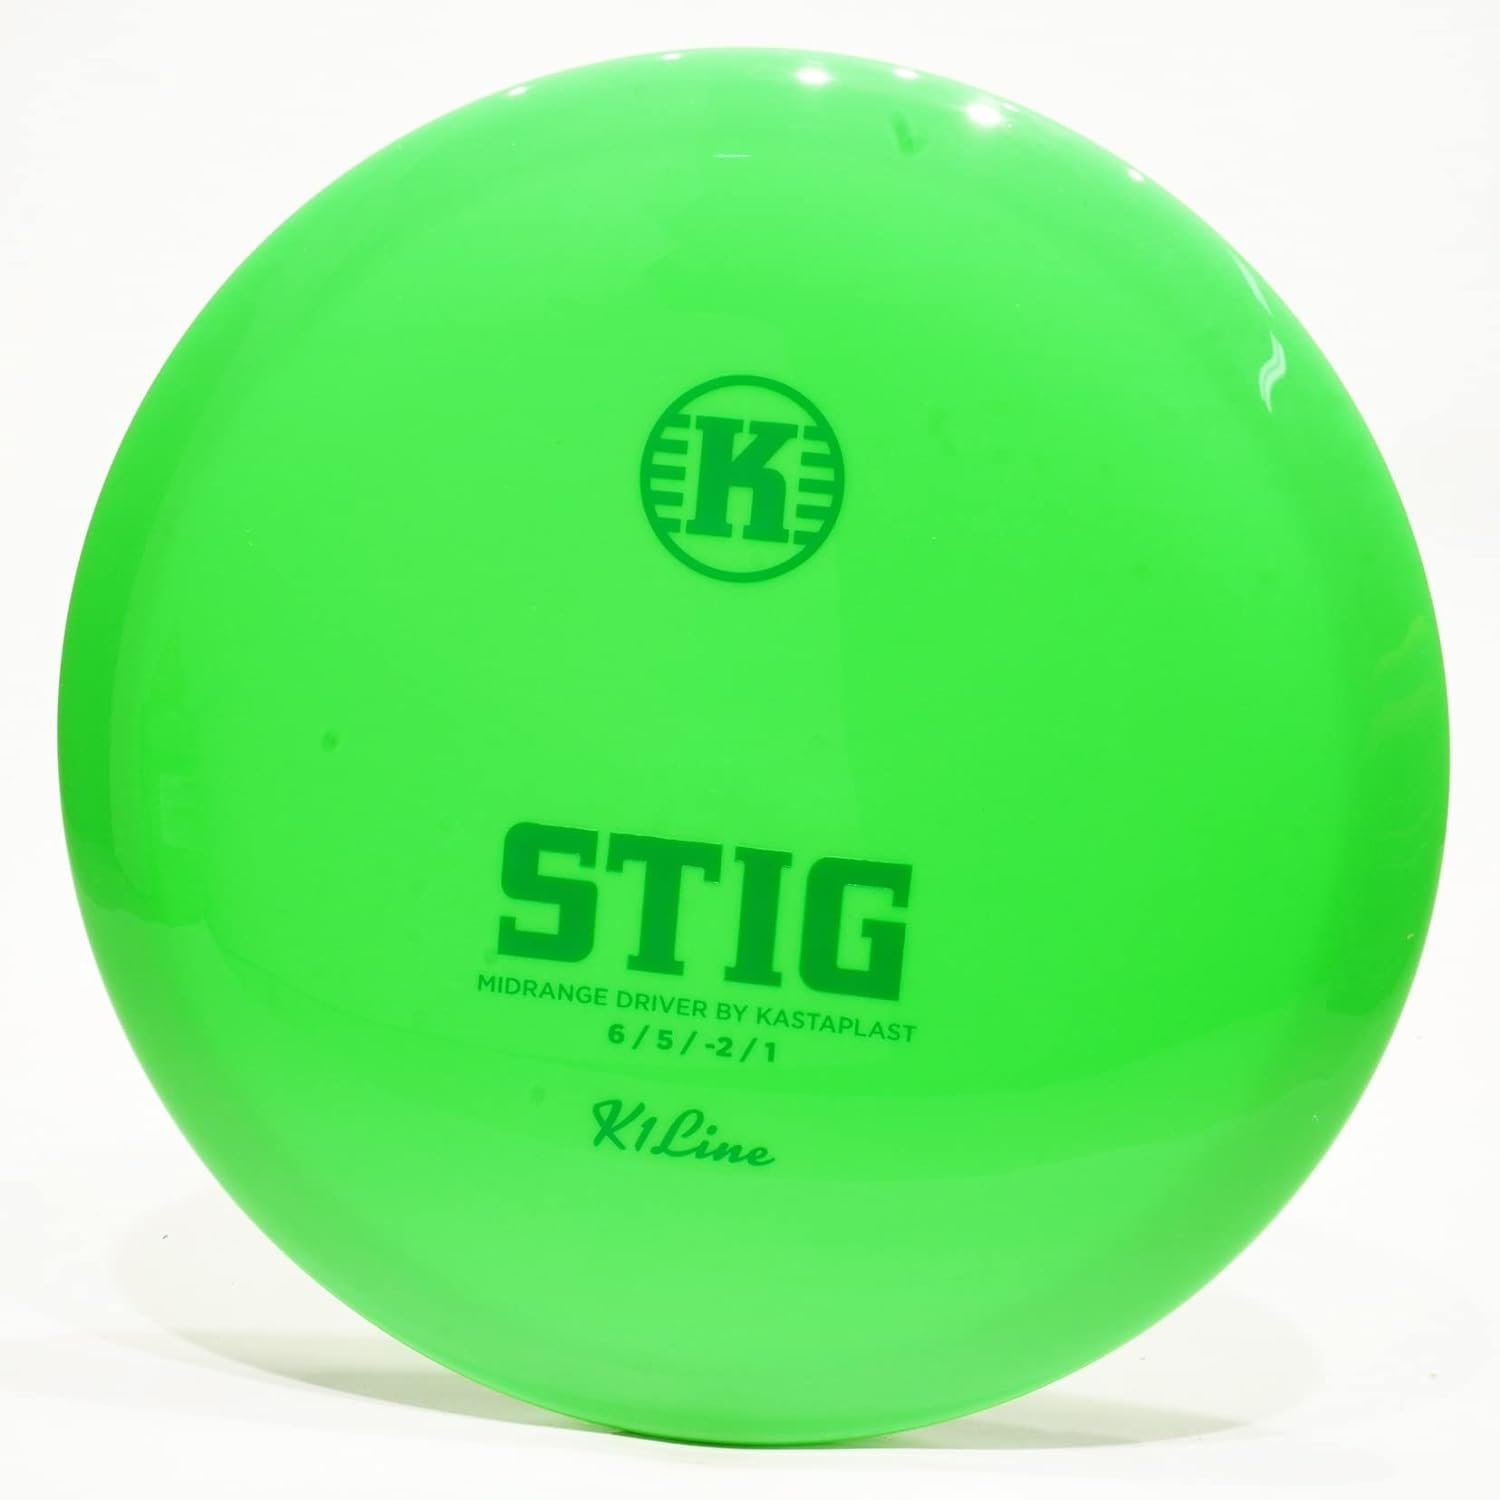 Kastaplast K1 Stig Fairway Driver Golf Disc, Pick Color/Weight [Stamp  Exact Color May Vary] Green 170-172 Grams Green 170-172 Grams